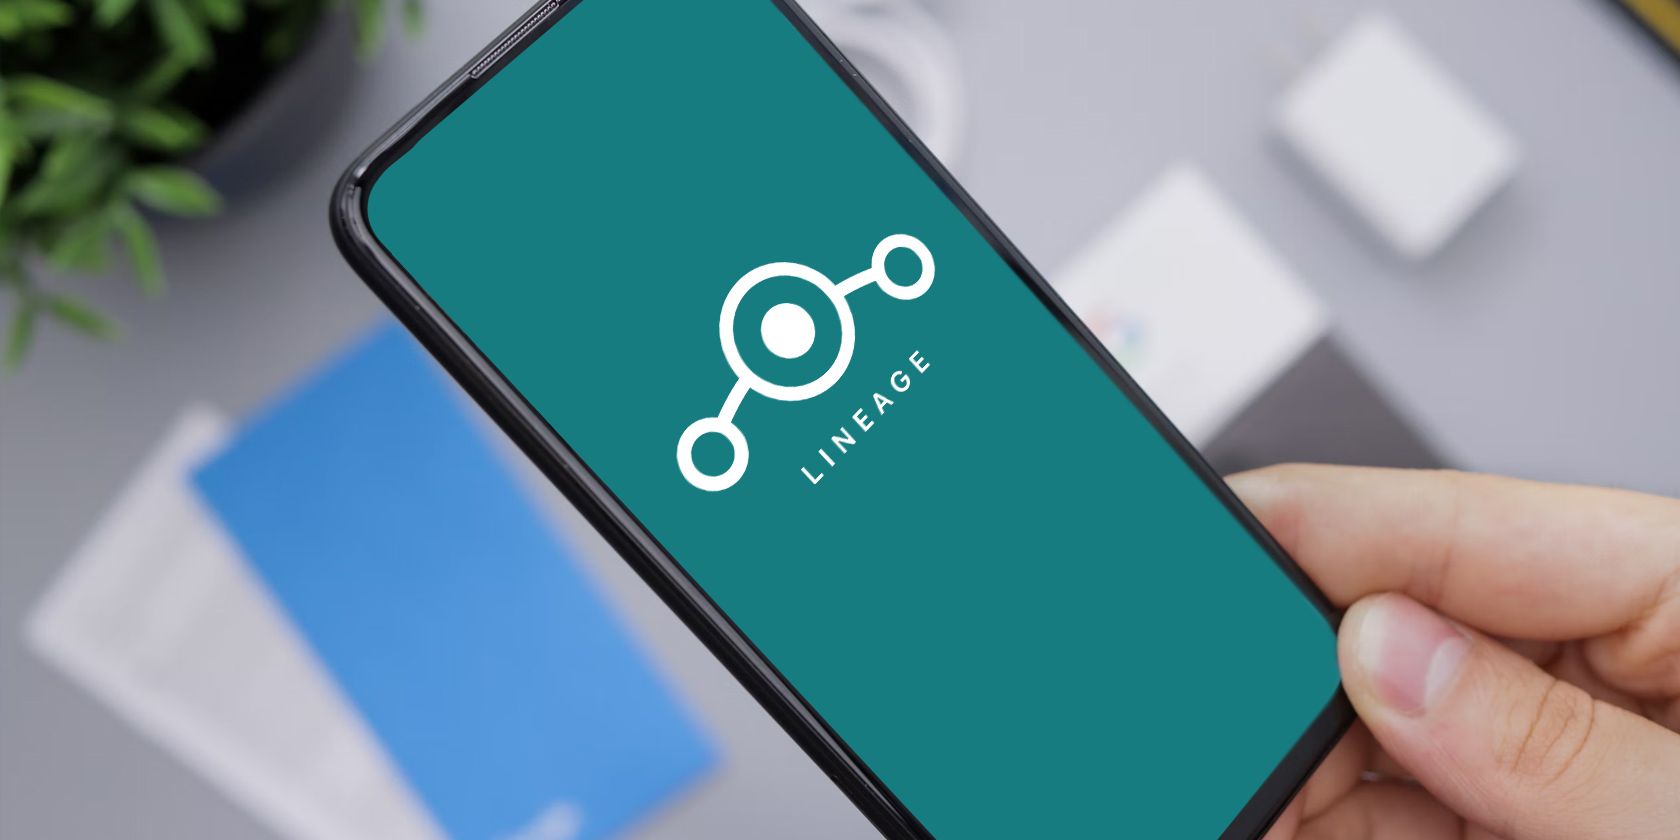 Lineage OS, on smartphone